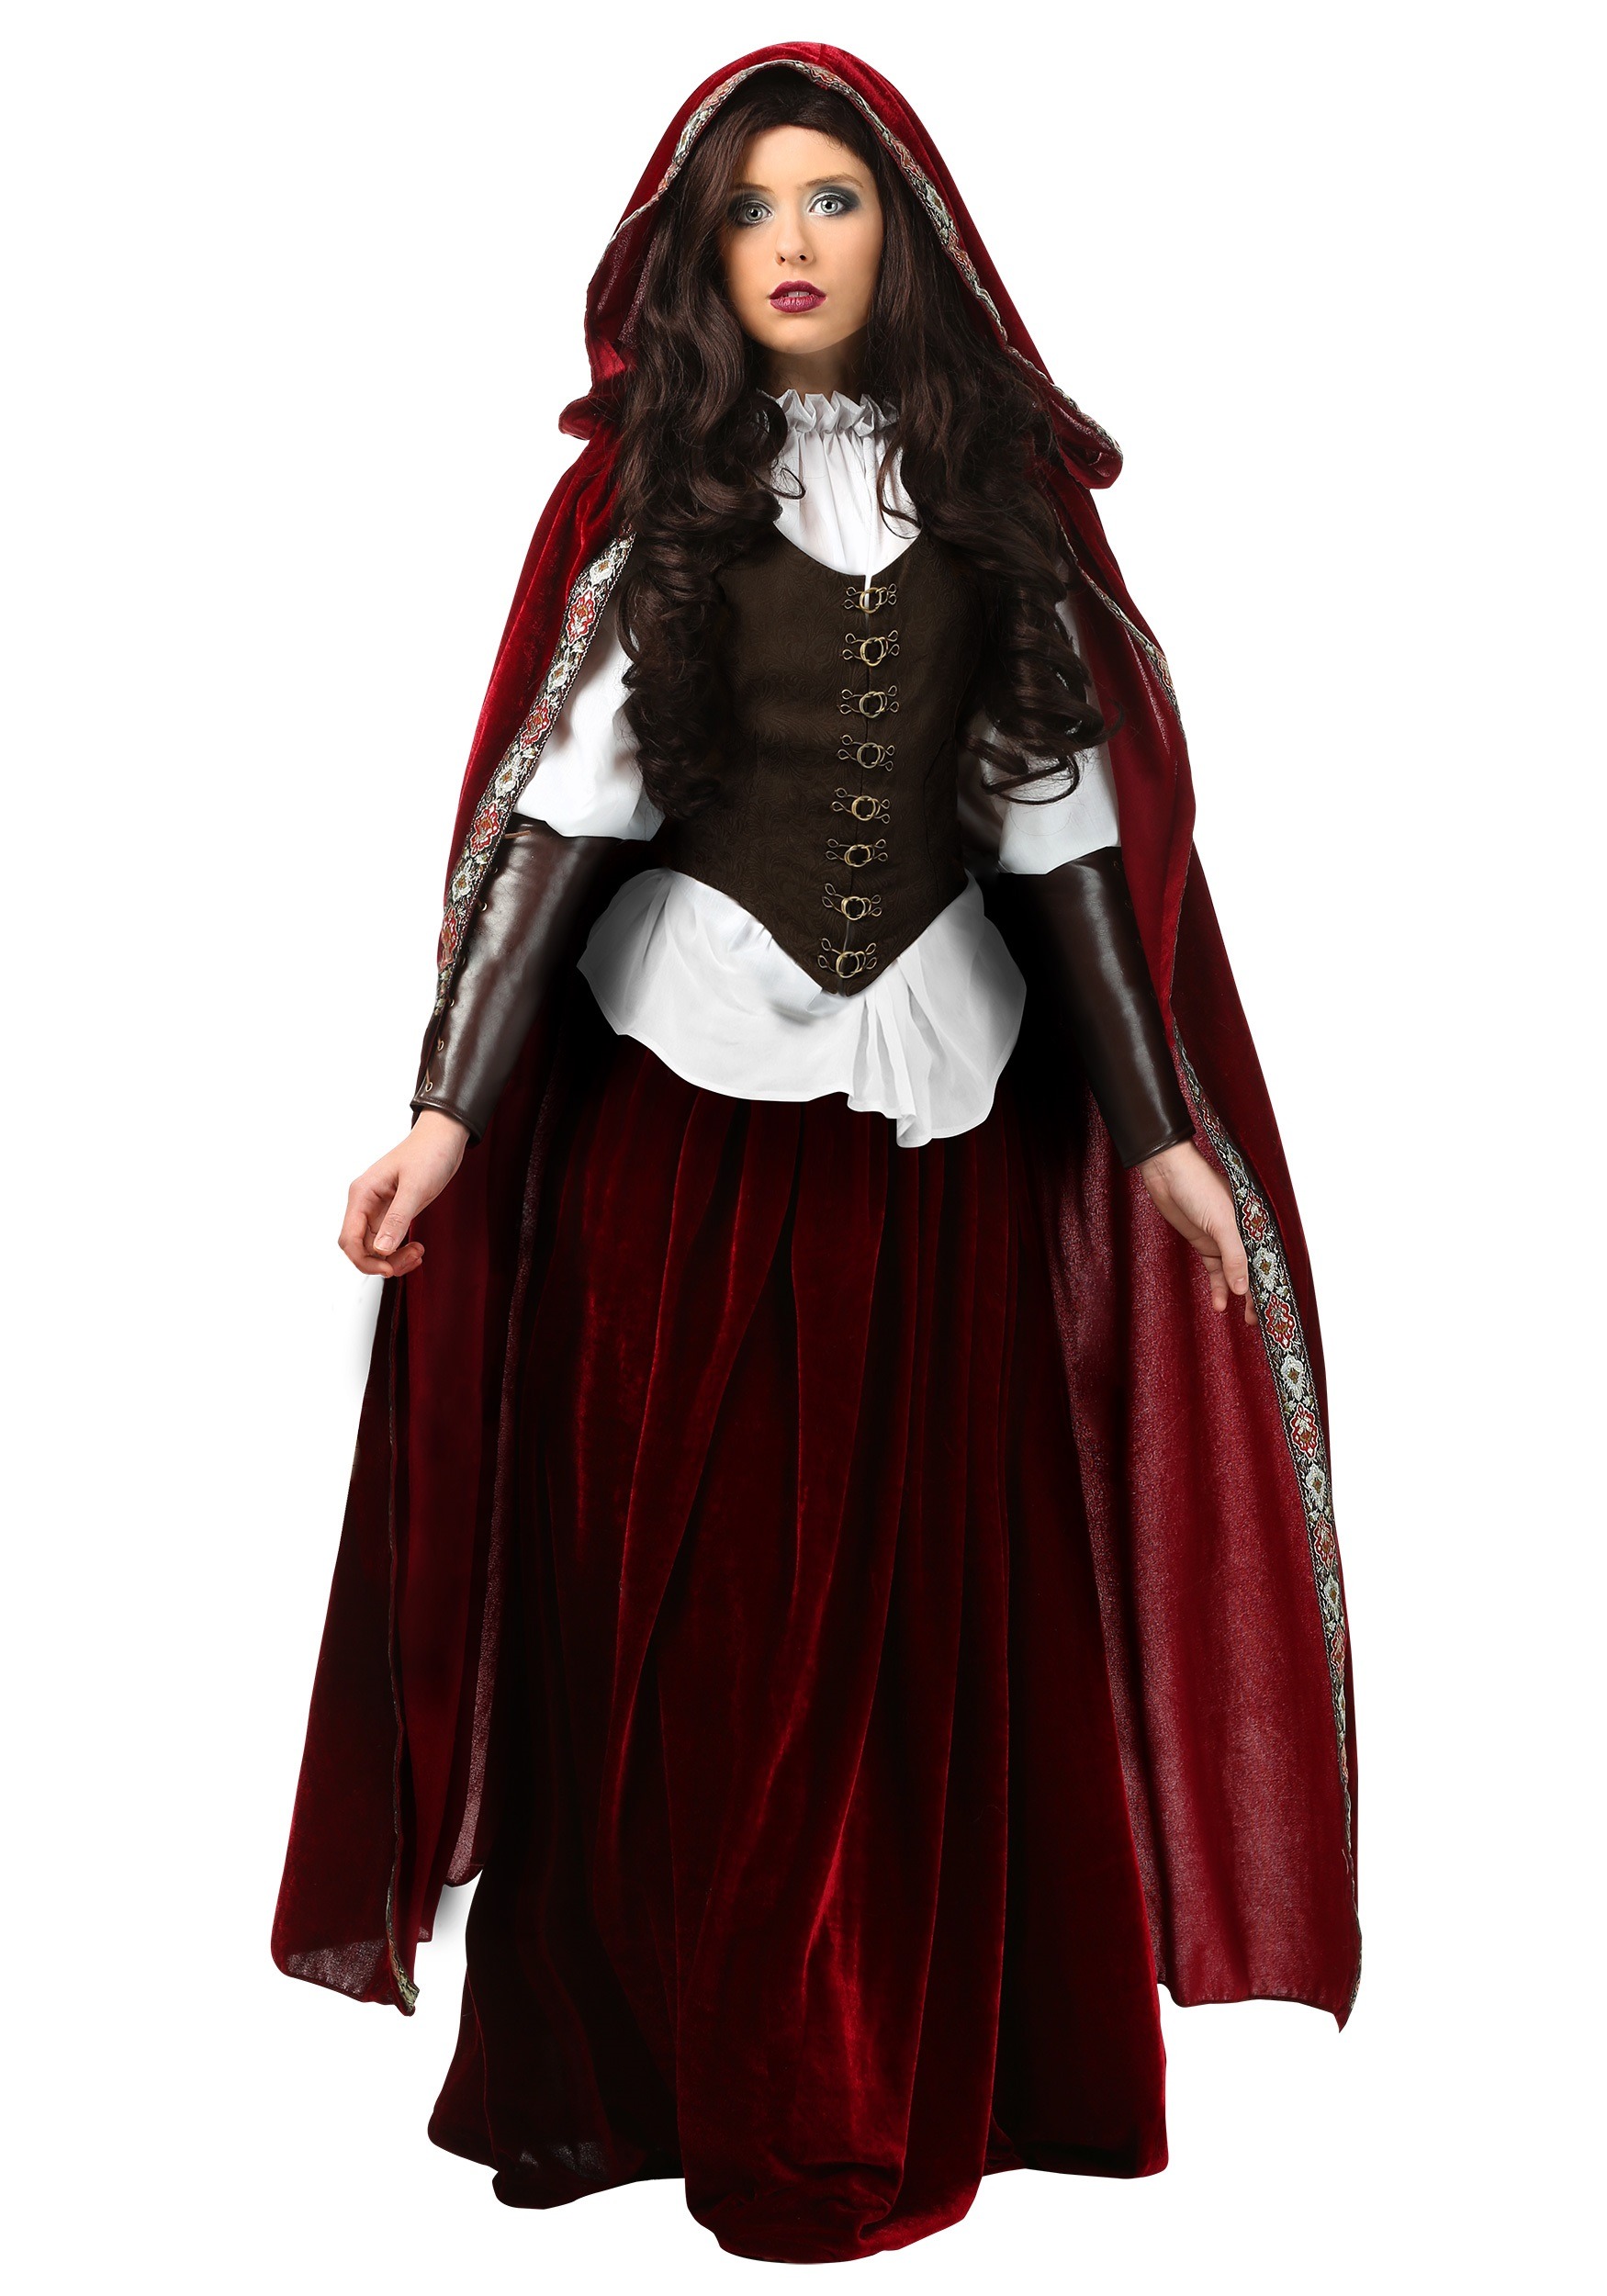 Photos - Fancy Dress Deluxe FUN Costumes  Red Riding Hood Plus Size Women's Costume | Exclusive 